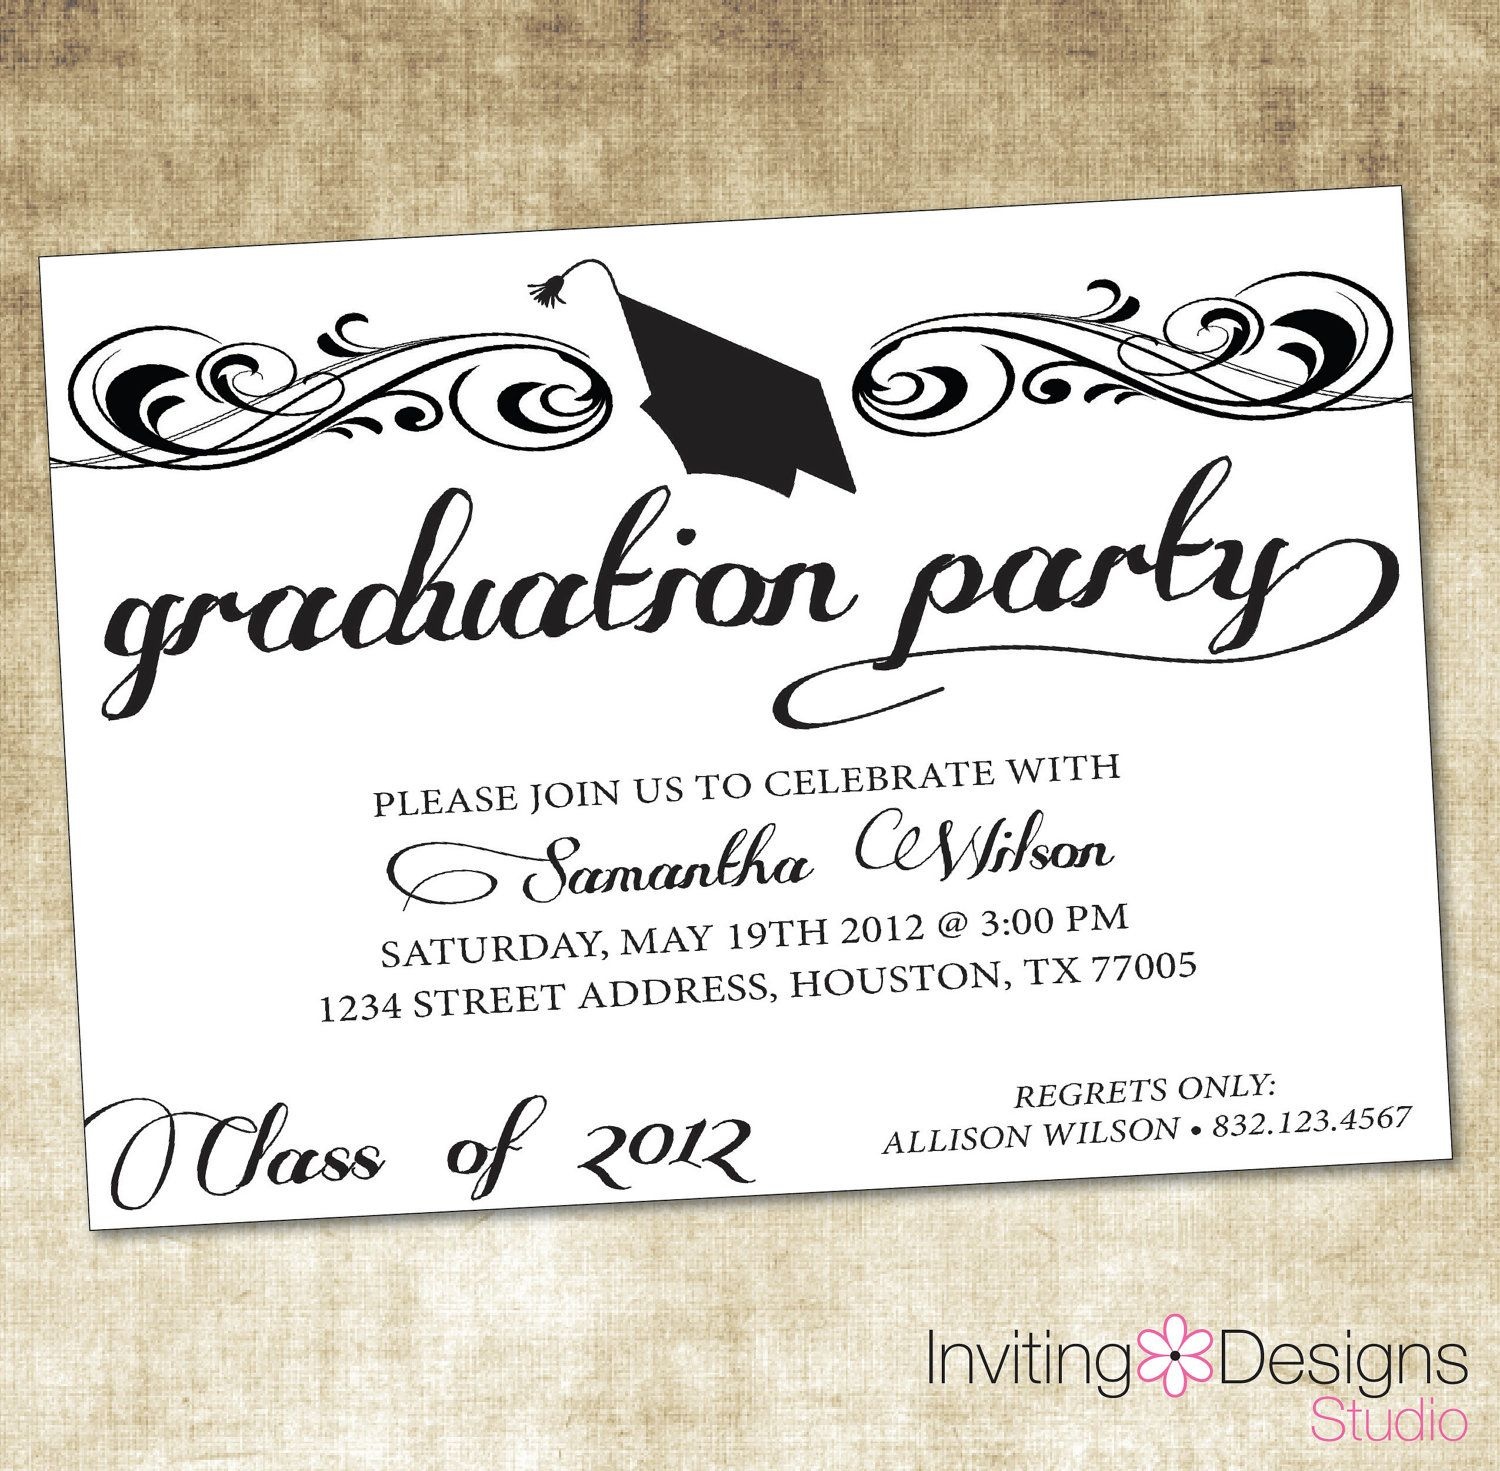 Image Result For Graduation Party Invitation Wording Ideas | Zach - Free Printable Graduation Party Invitations 2014